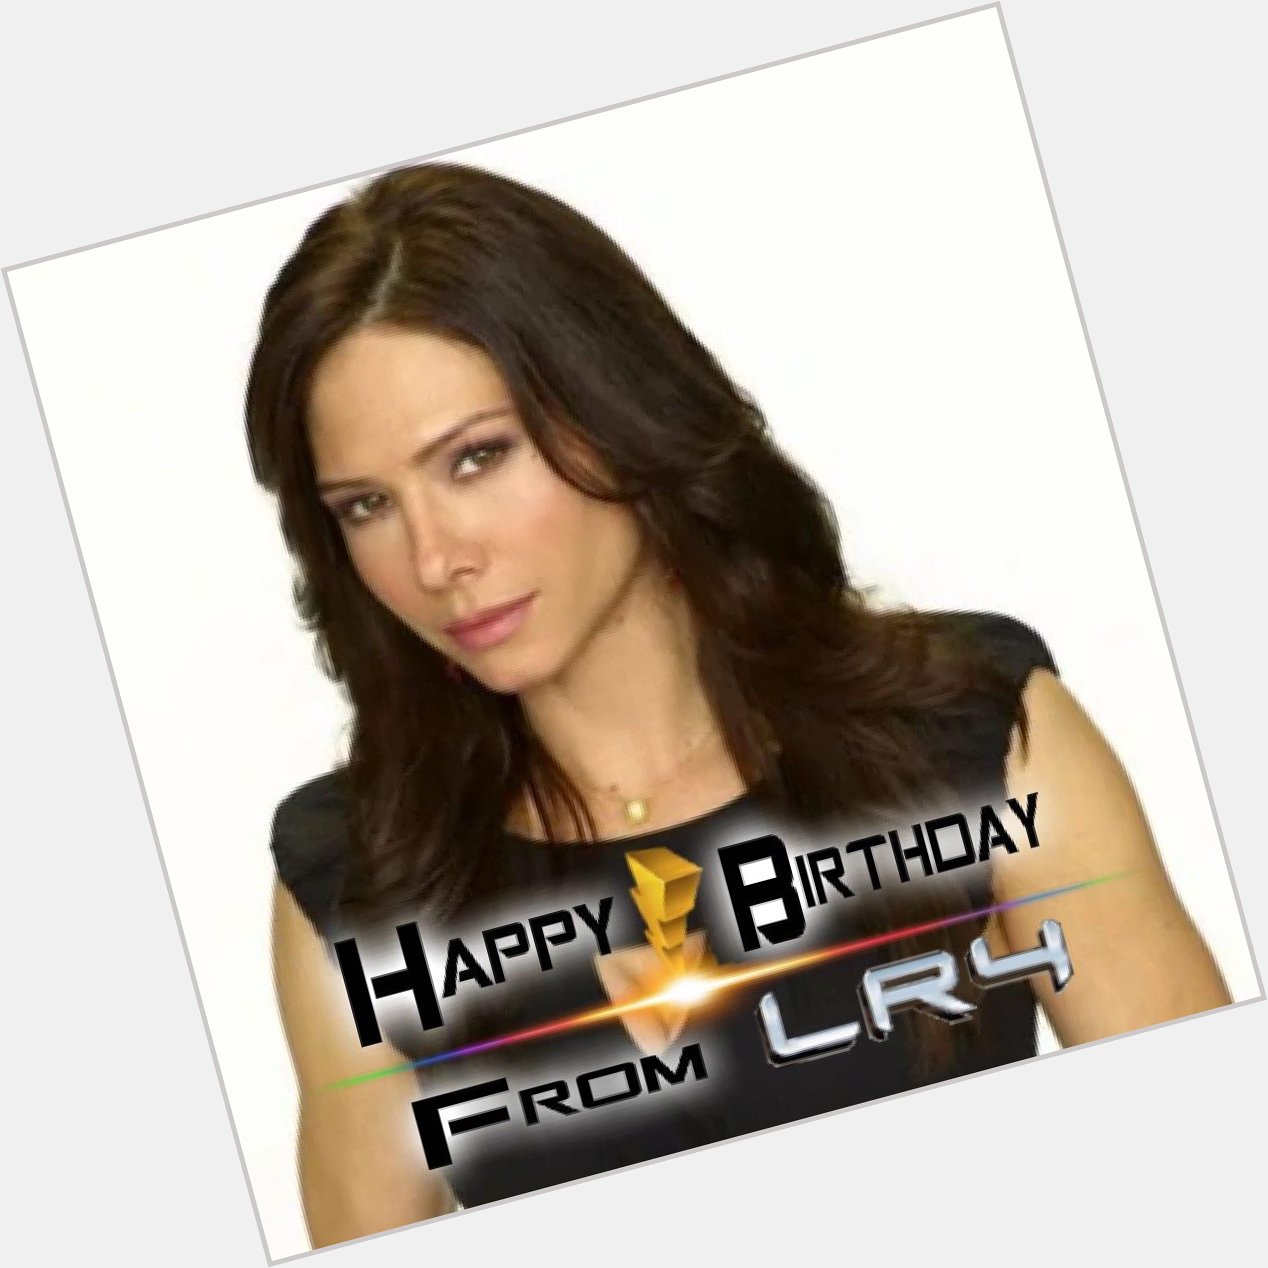 LR4 would like to wish Sarah Brown a Happy Birthday! 